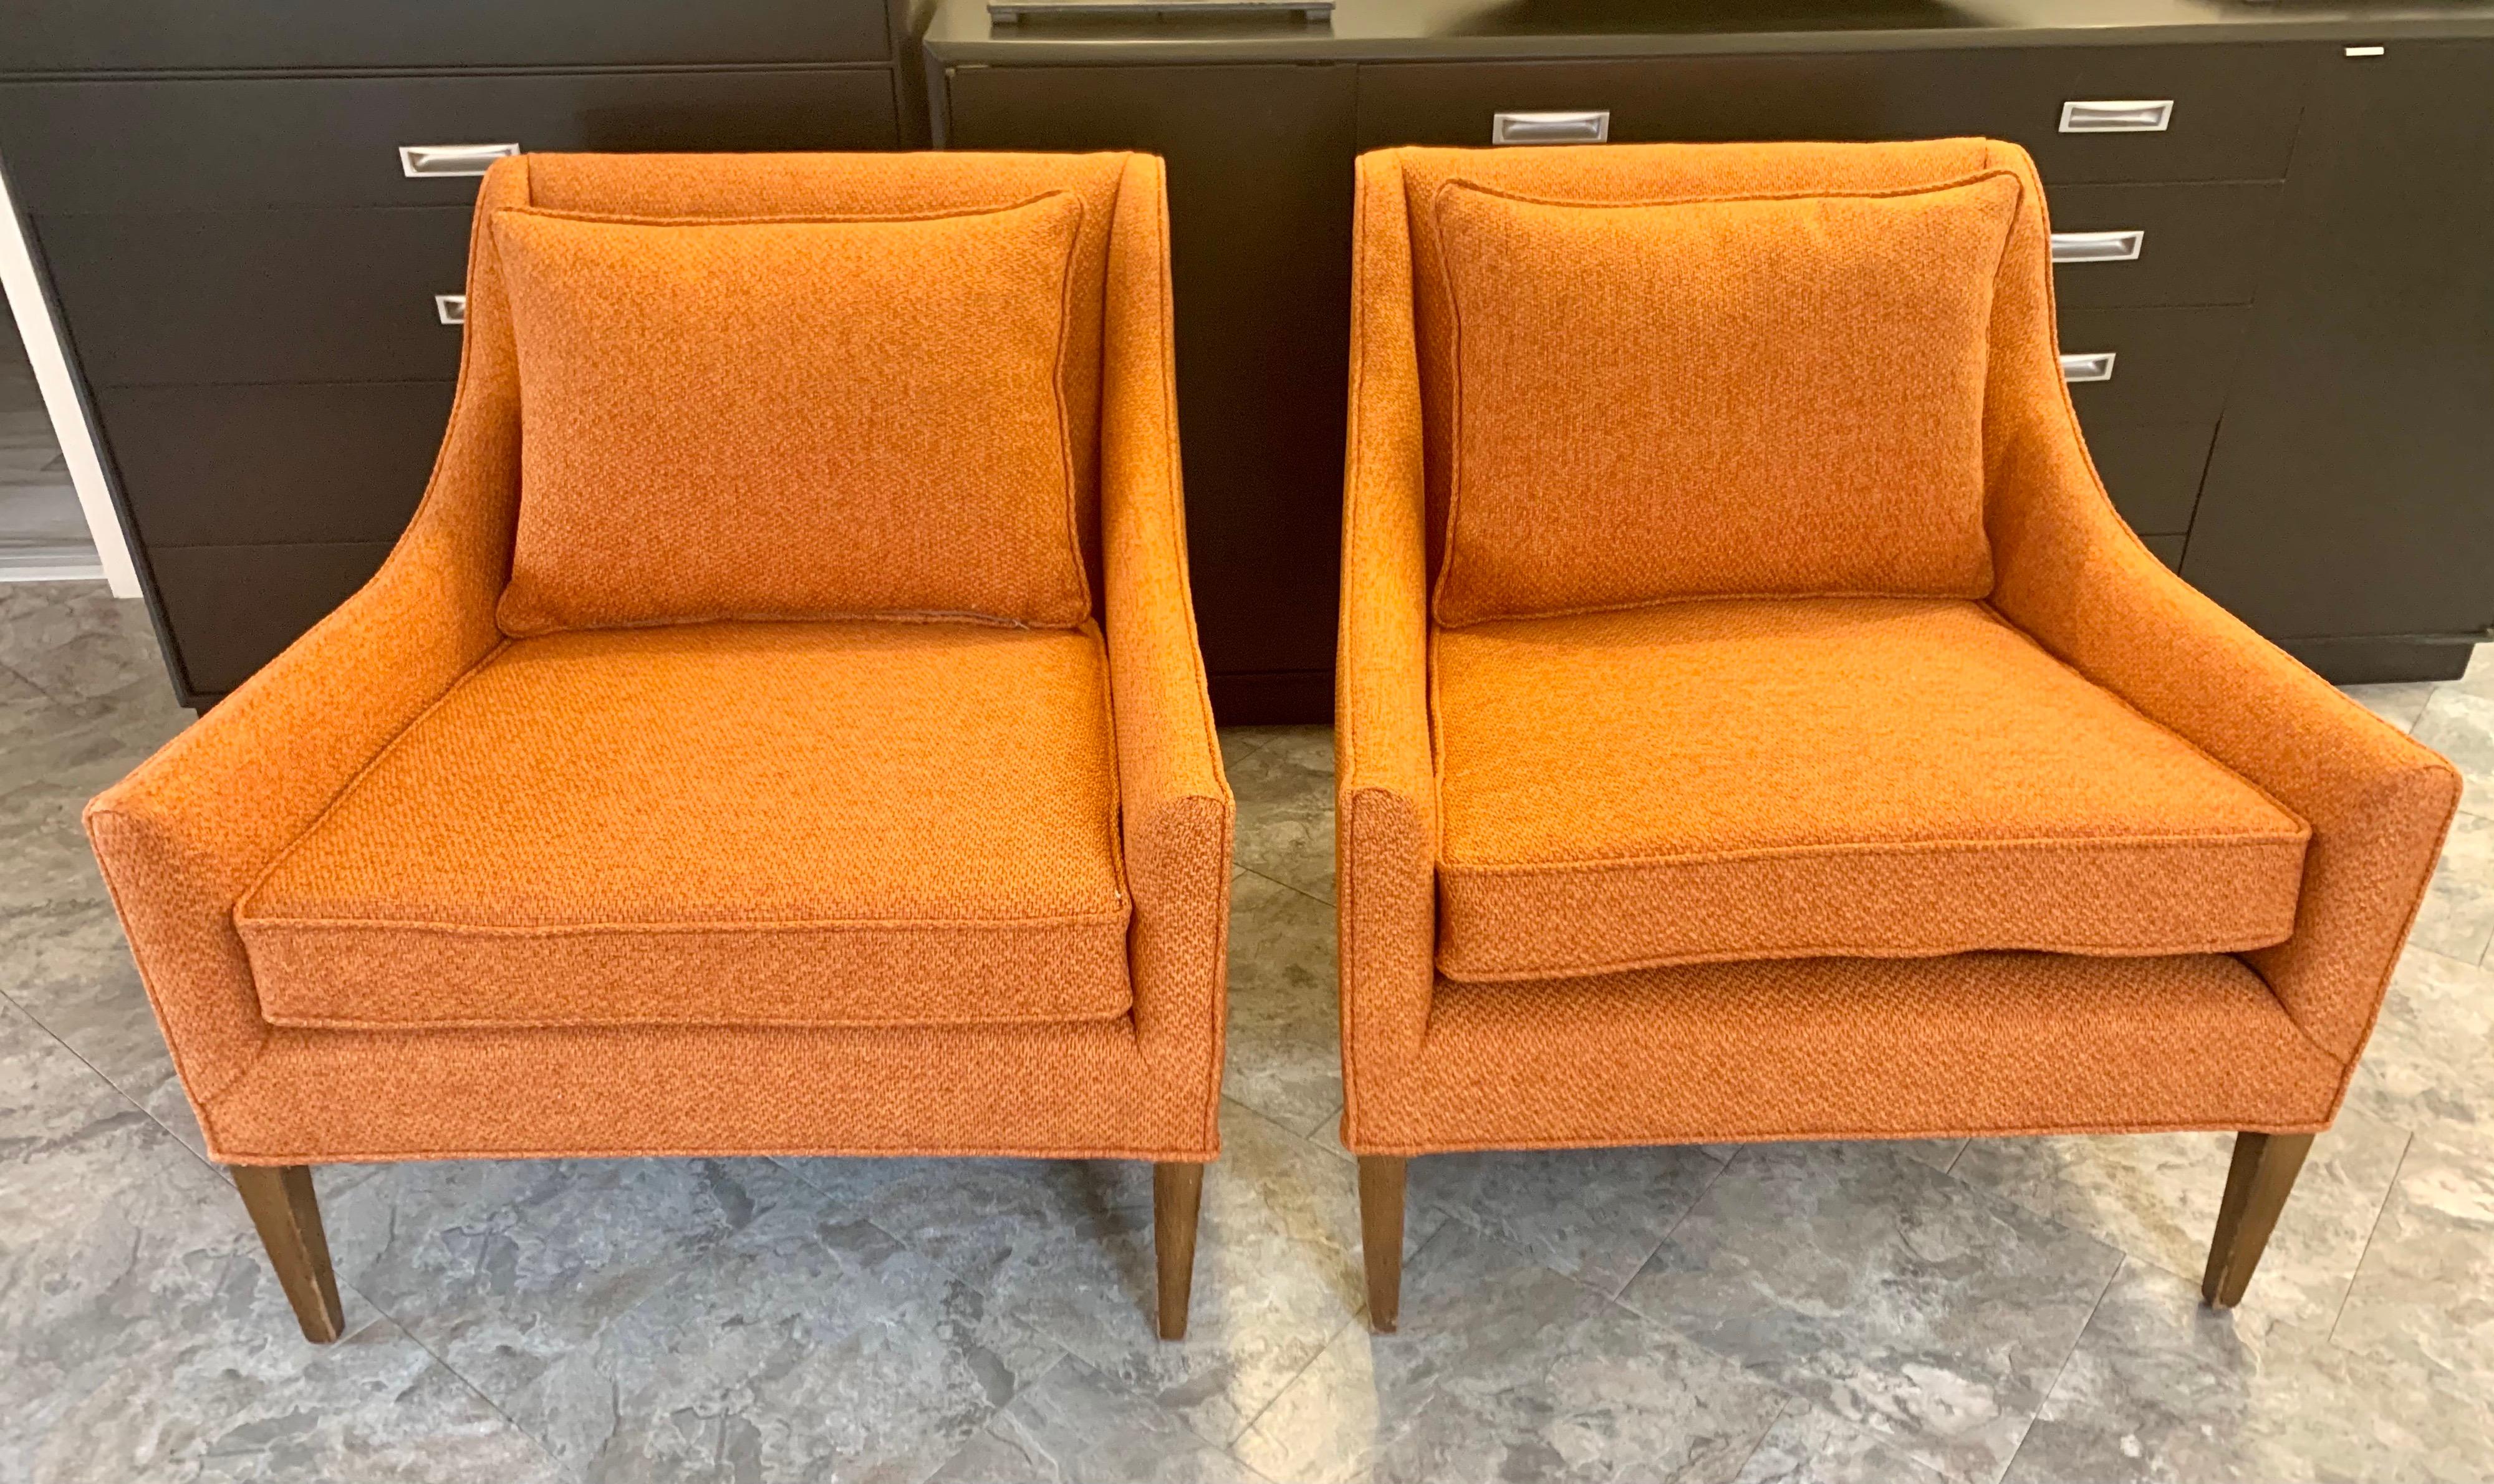 Just reupholstered in a gorgeous Hermes orange colored woven fabric, this pair of Mid-Century Modern arm chairs. Great condition. All dimensions are below.